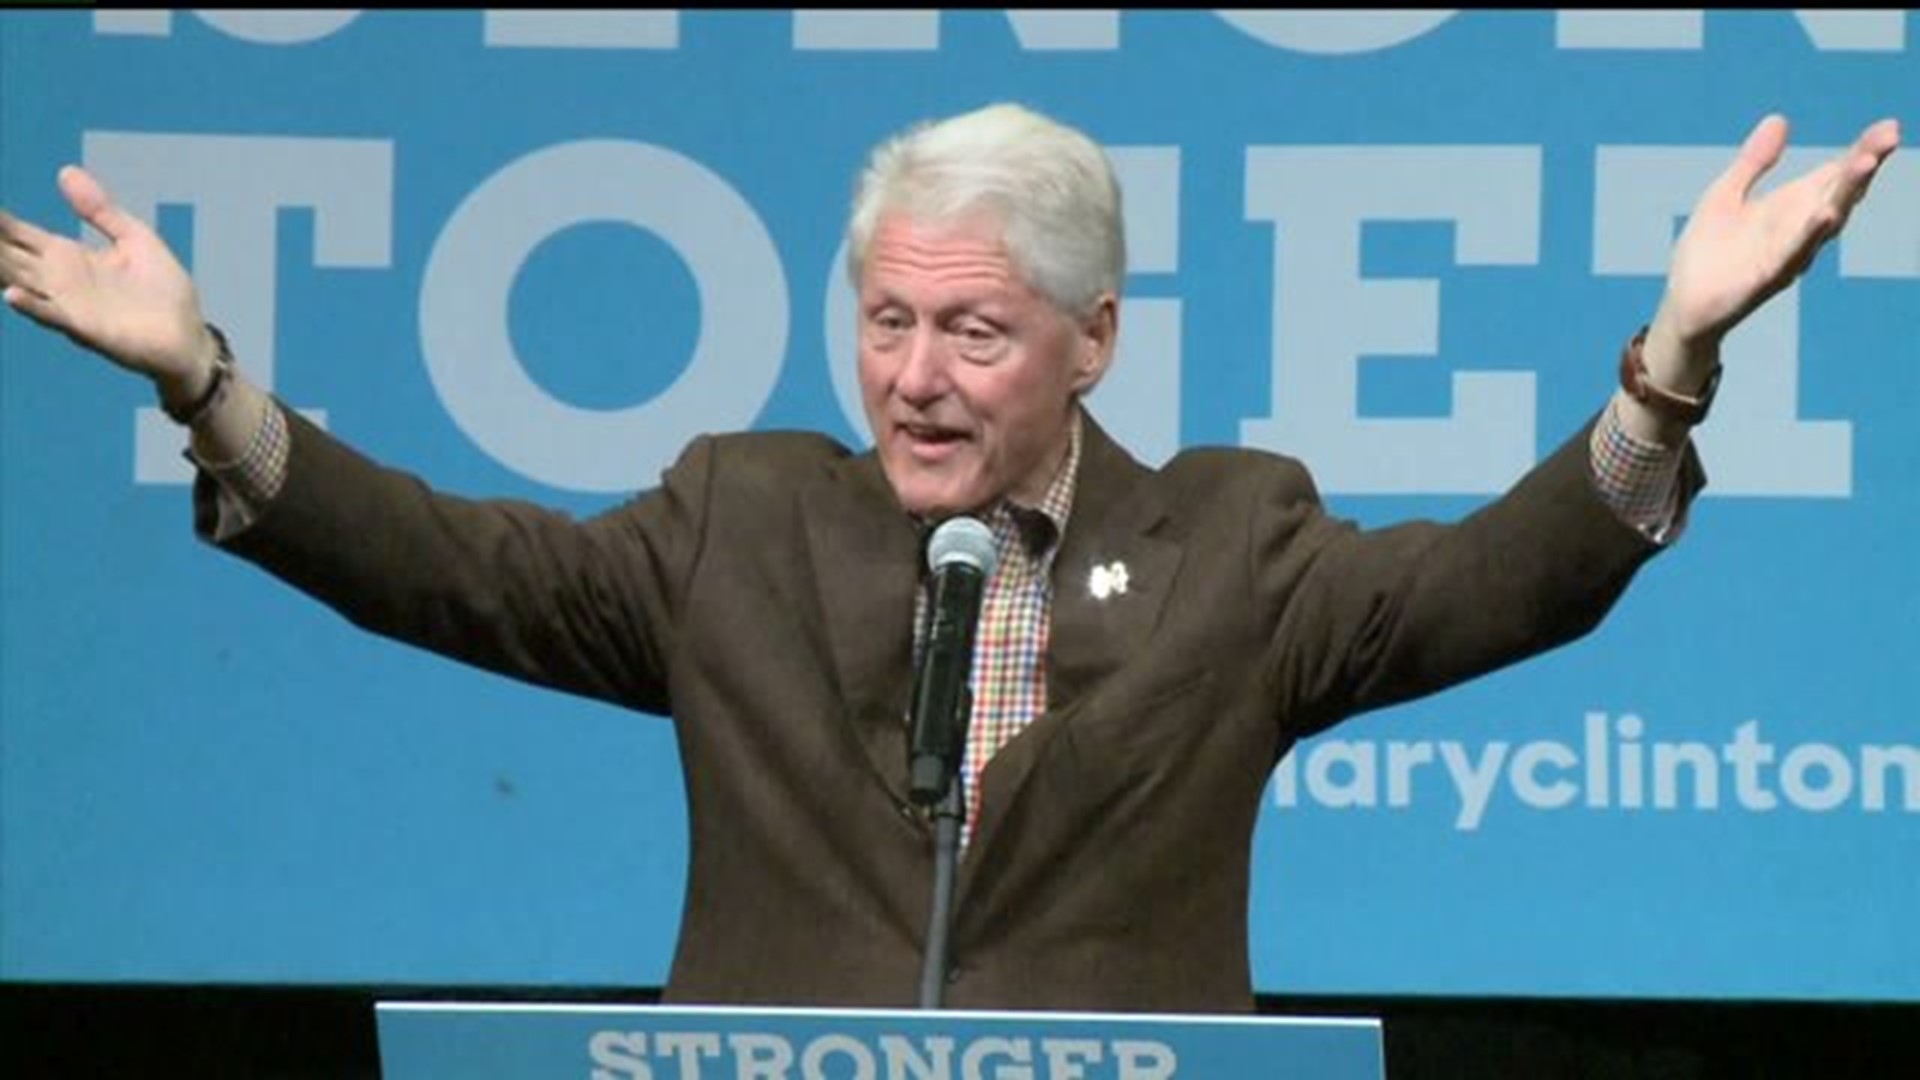 Bill Clinton visits Davenport on early voting promotion tour